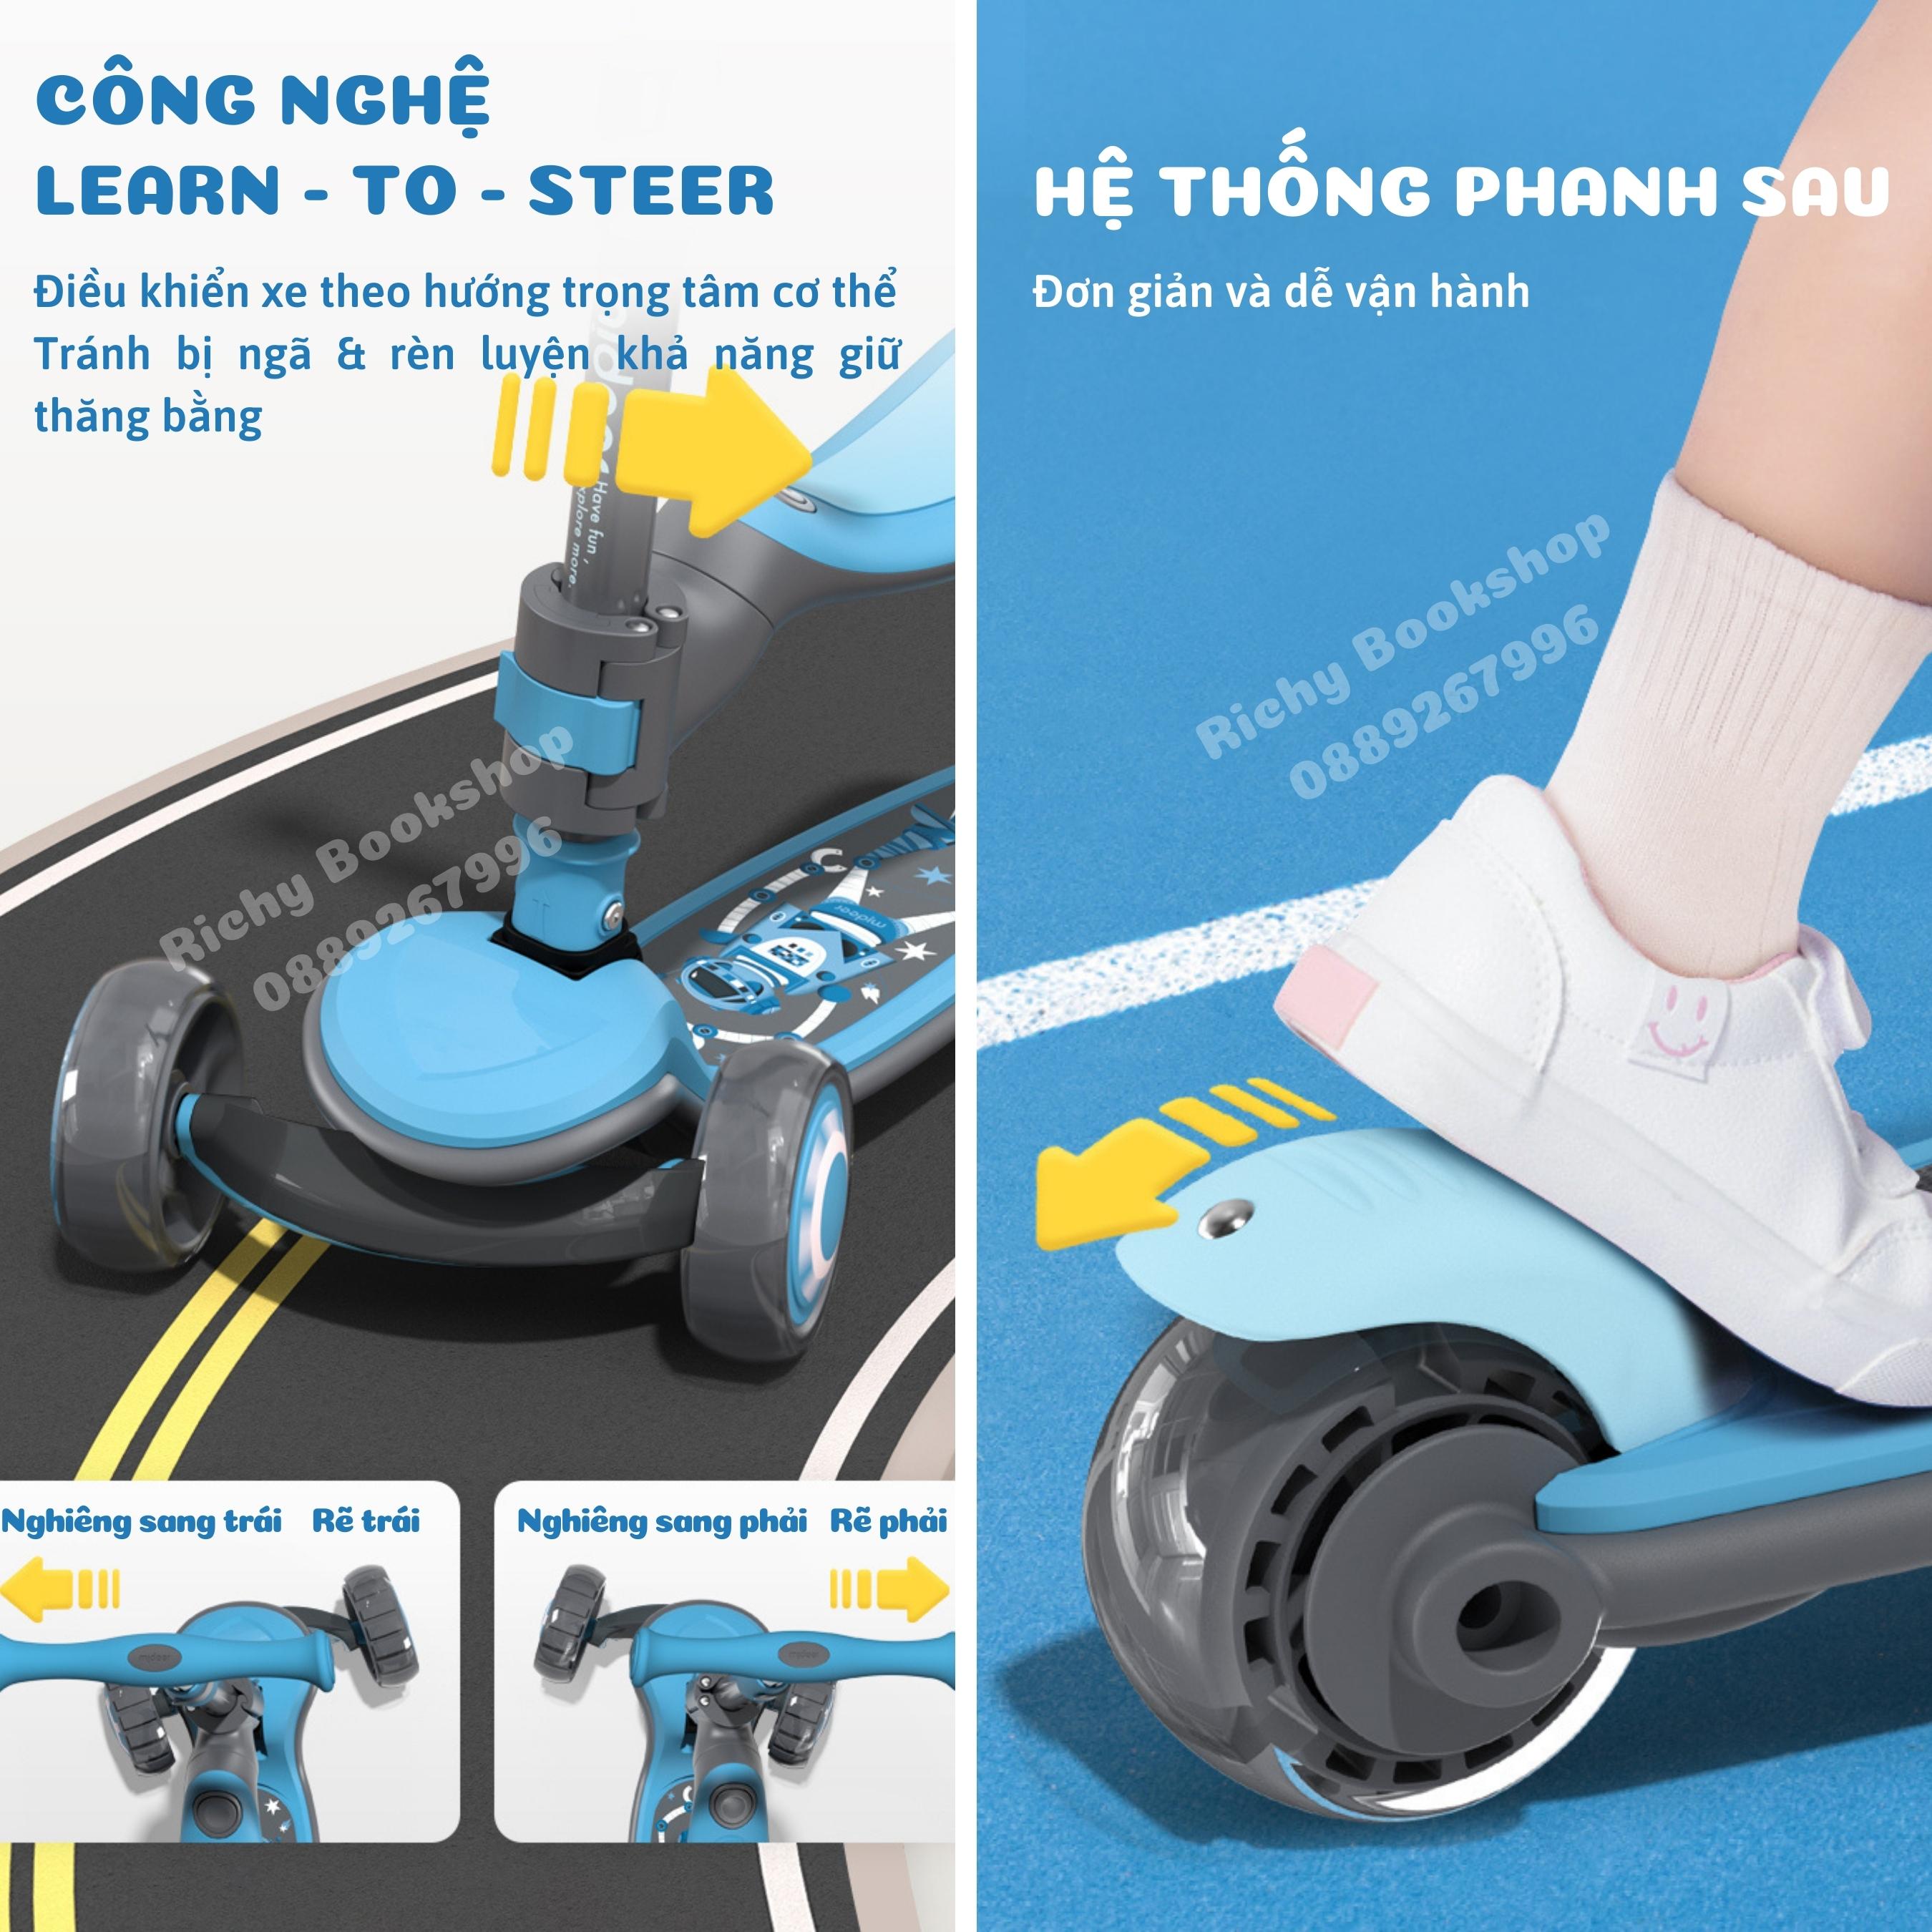 Xe Scooter Mideer Scooter 2 in 1 - Xe Scooter Cao Cấp 3 Bánh Phát Sáng Gấp Gọn